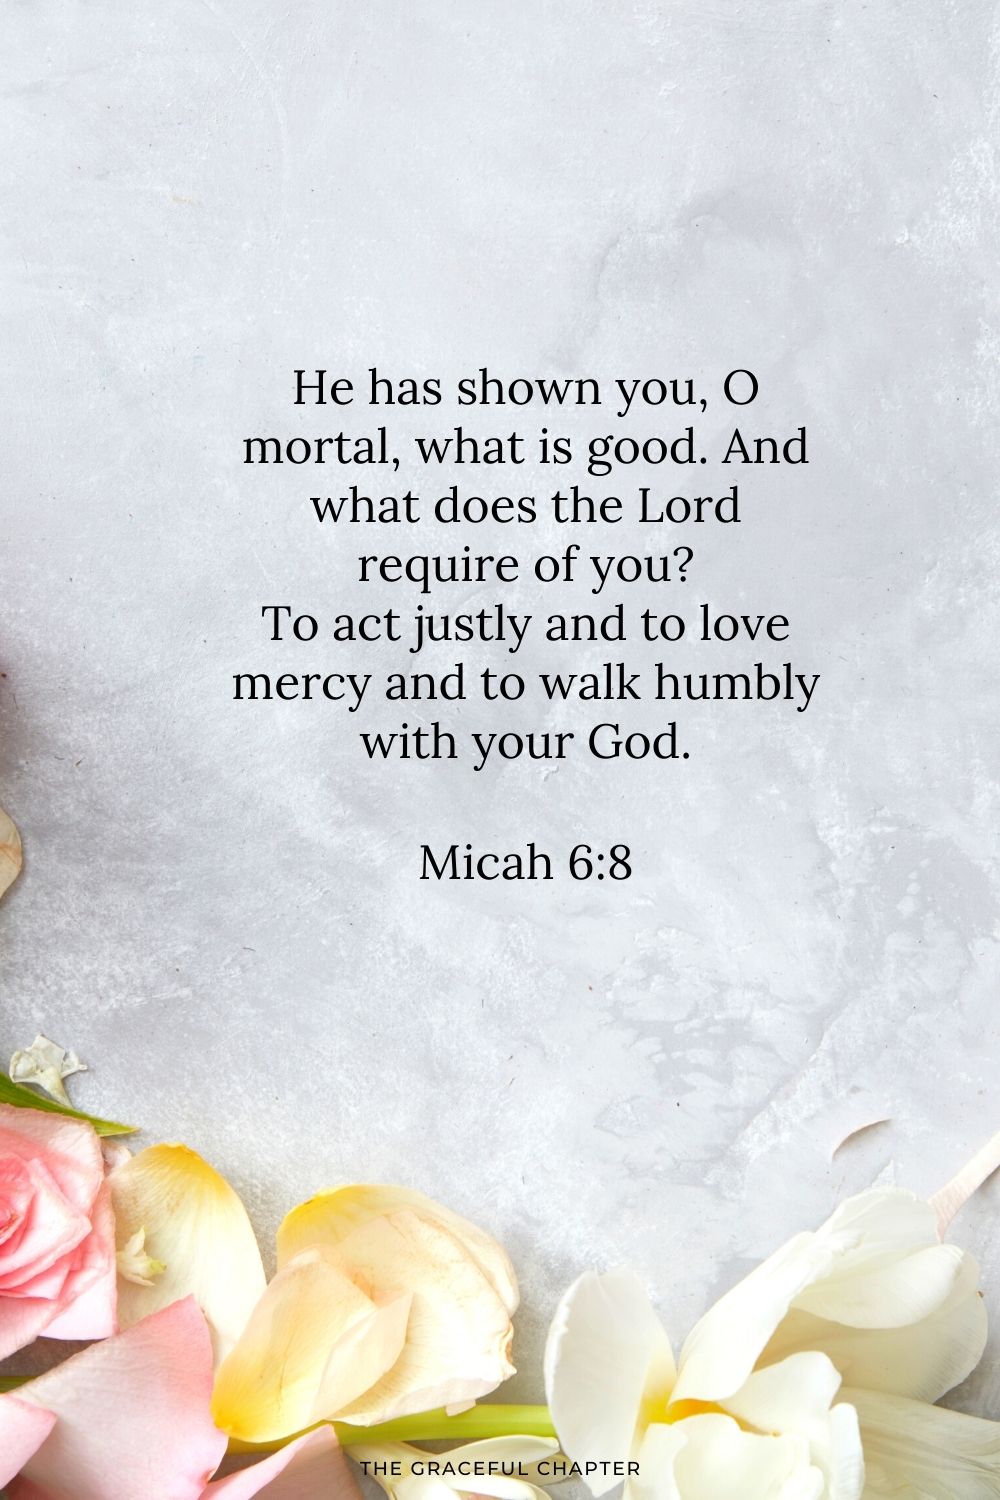 He has shown you, O mortal, what is good. And what does the Lord require of you? To act justly and to love mercy and to walk humbly with your God. Micah 6:8